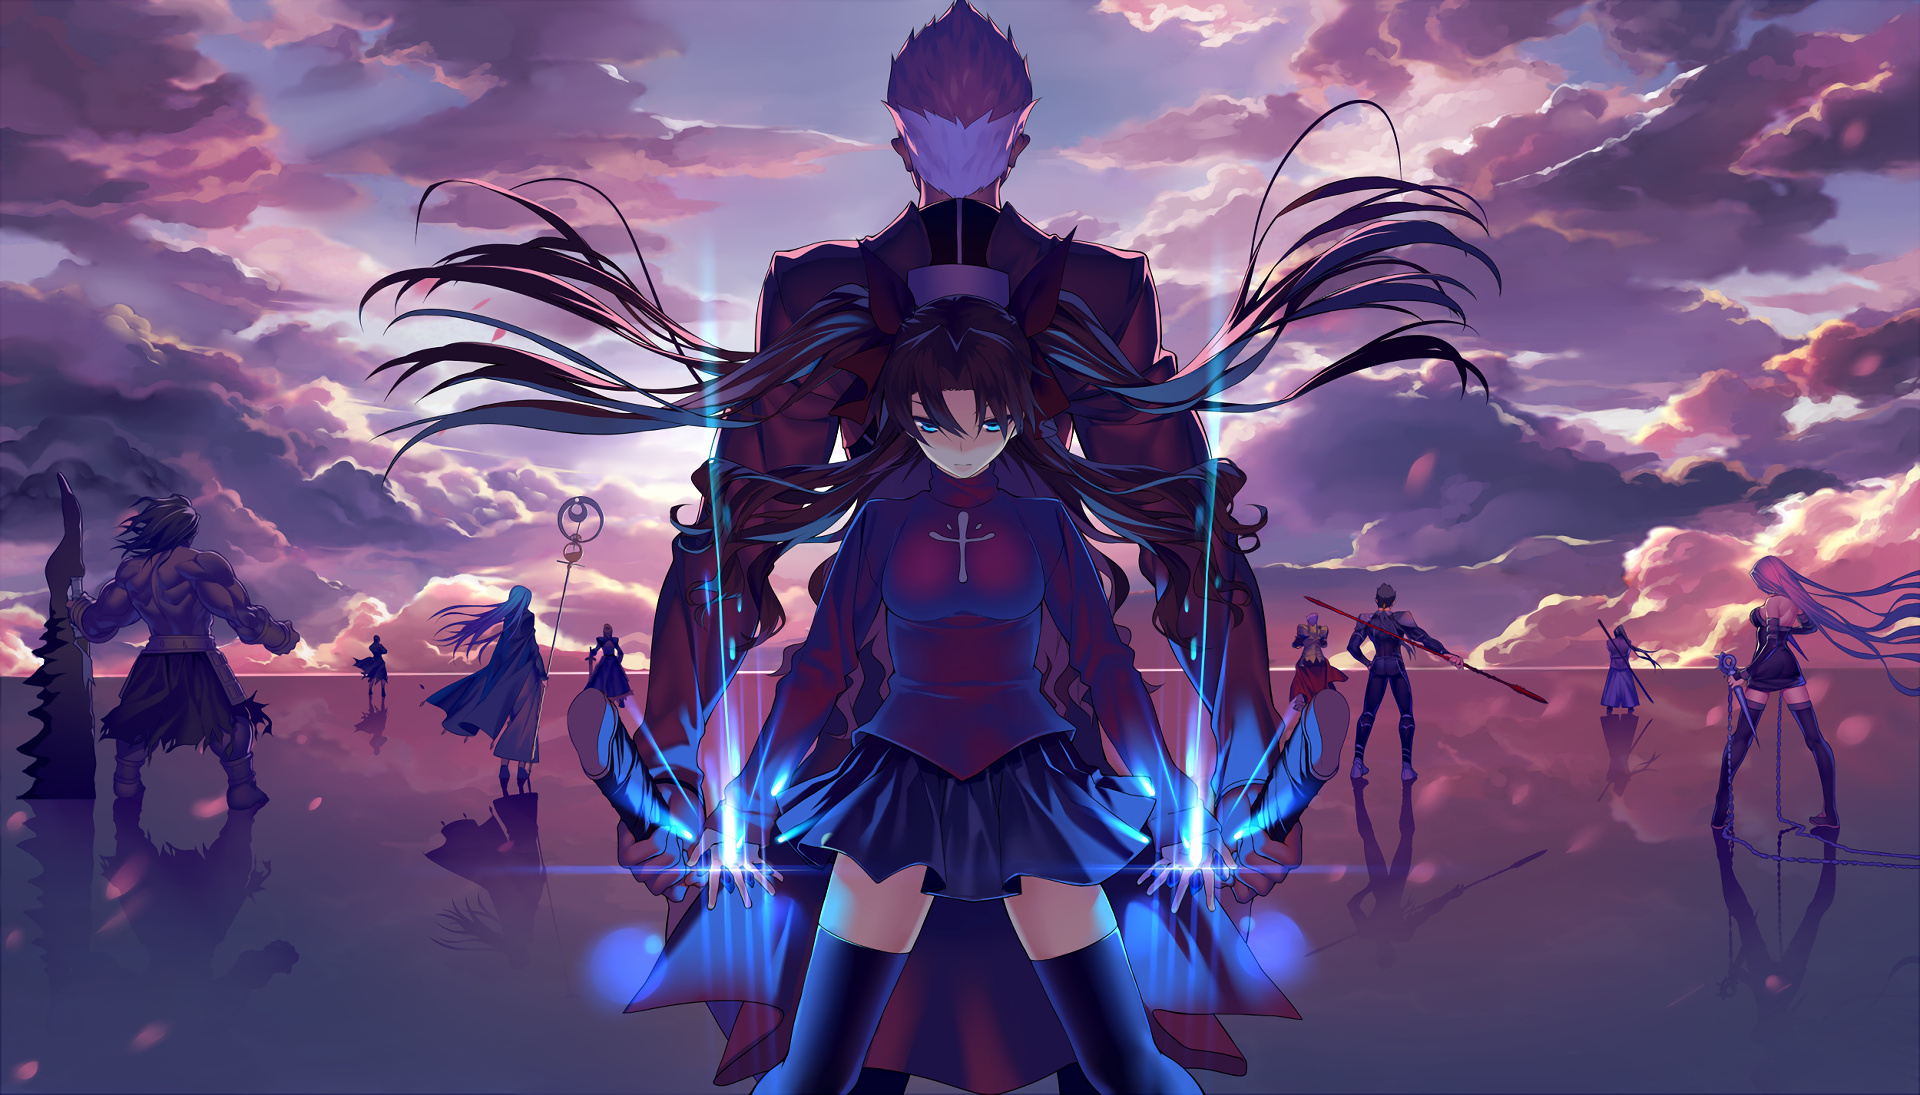 Fate/stay night: Unlimited Blade Works, Fate anime, HD wallpapers, 1920x1100 HD Desktop